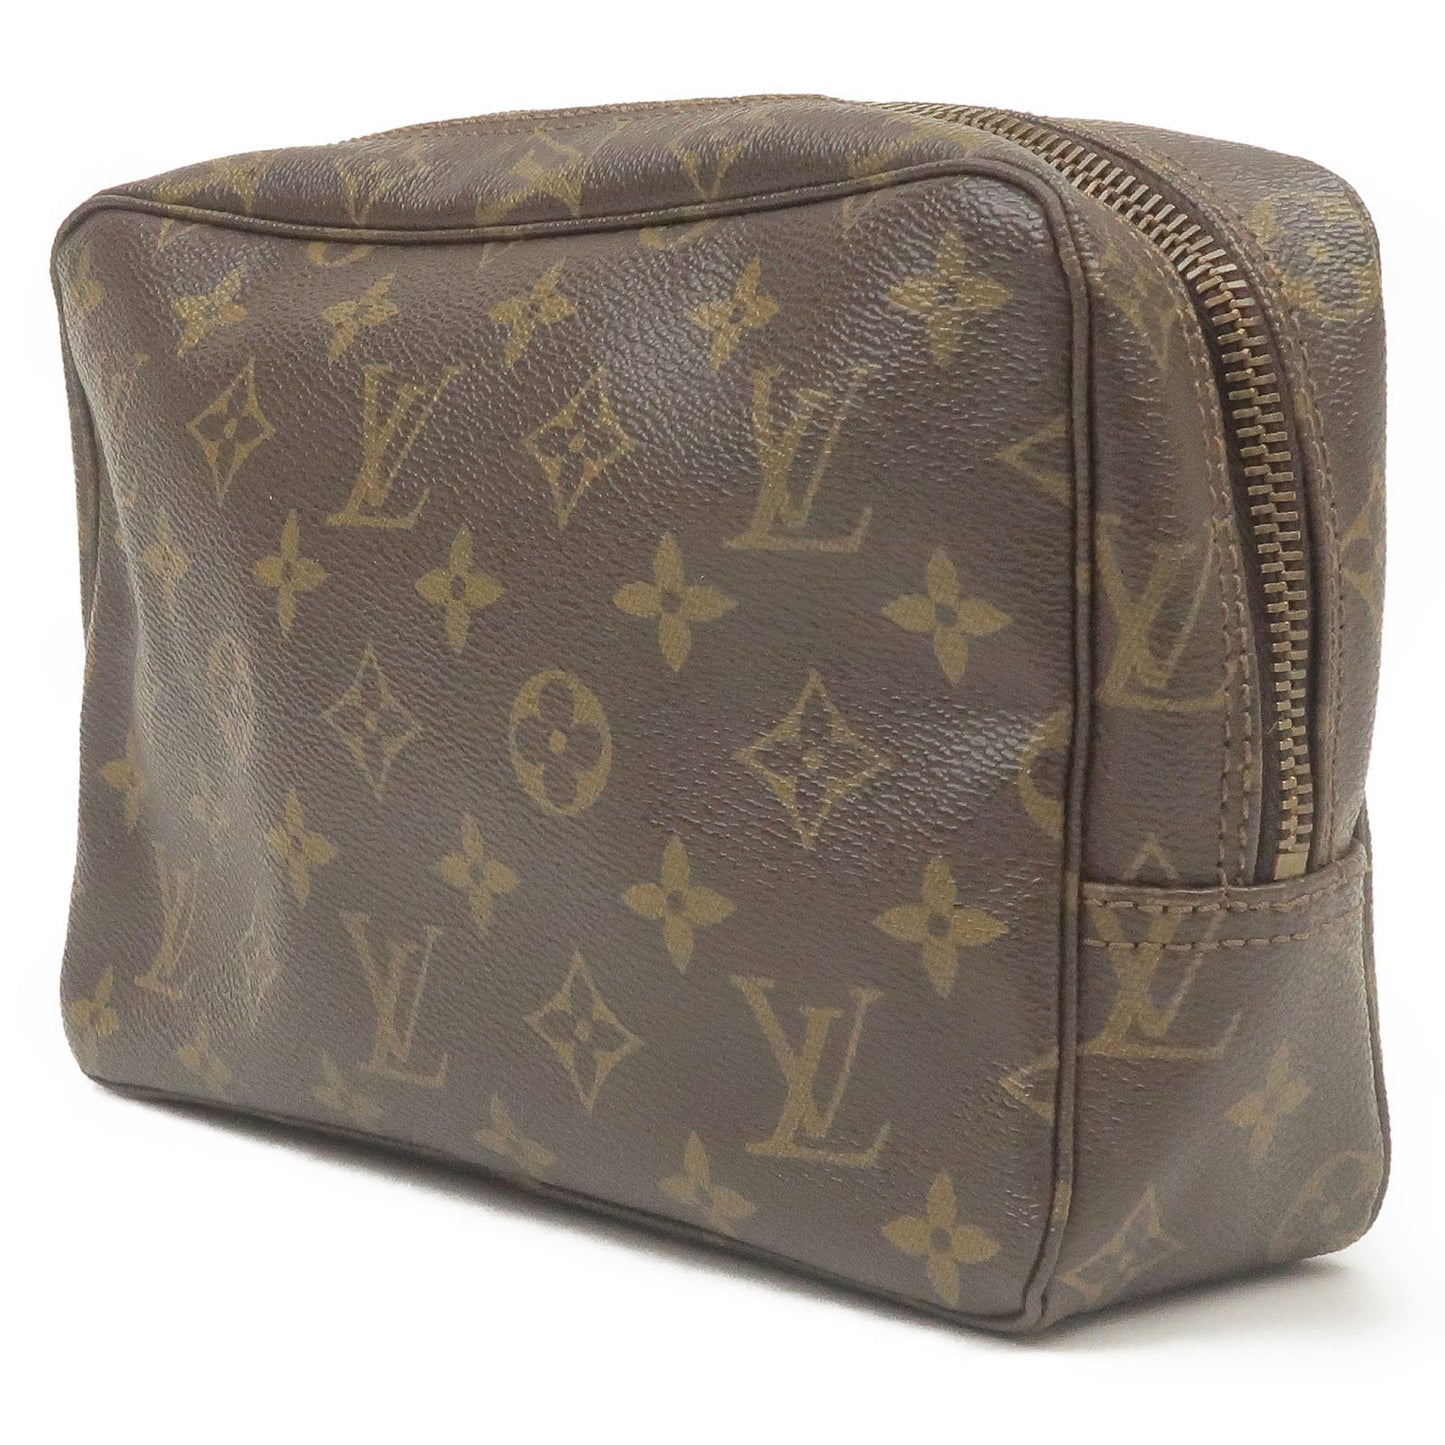 Stay tuned as we learn more about the upcoming Supreme x Louis Vuitton FW22  collab, Second Hand Louis Vuitton Bracelets